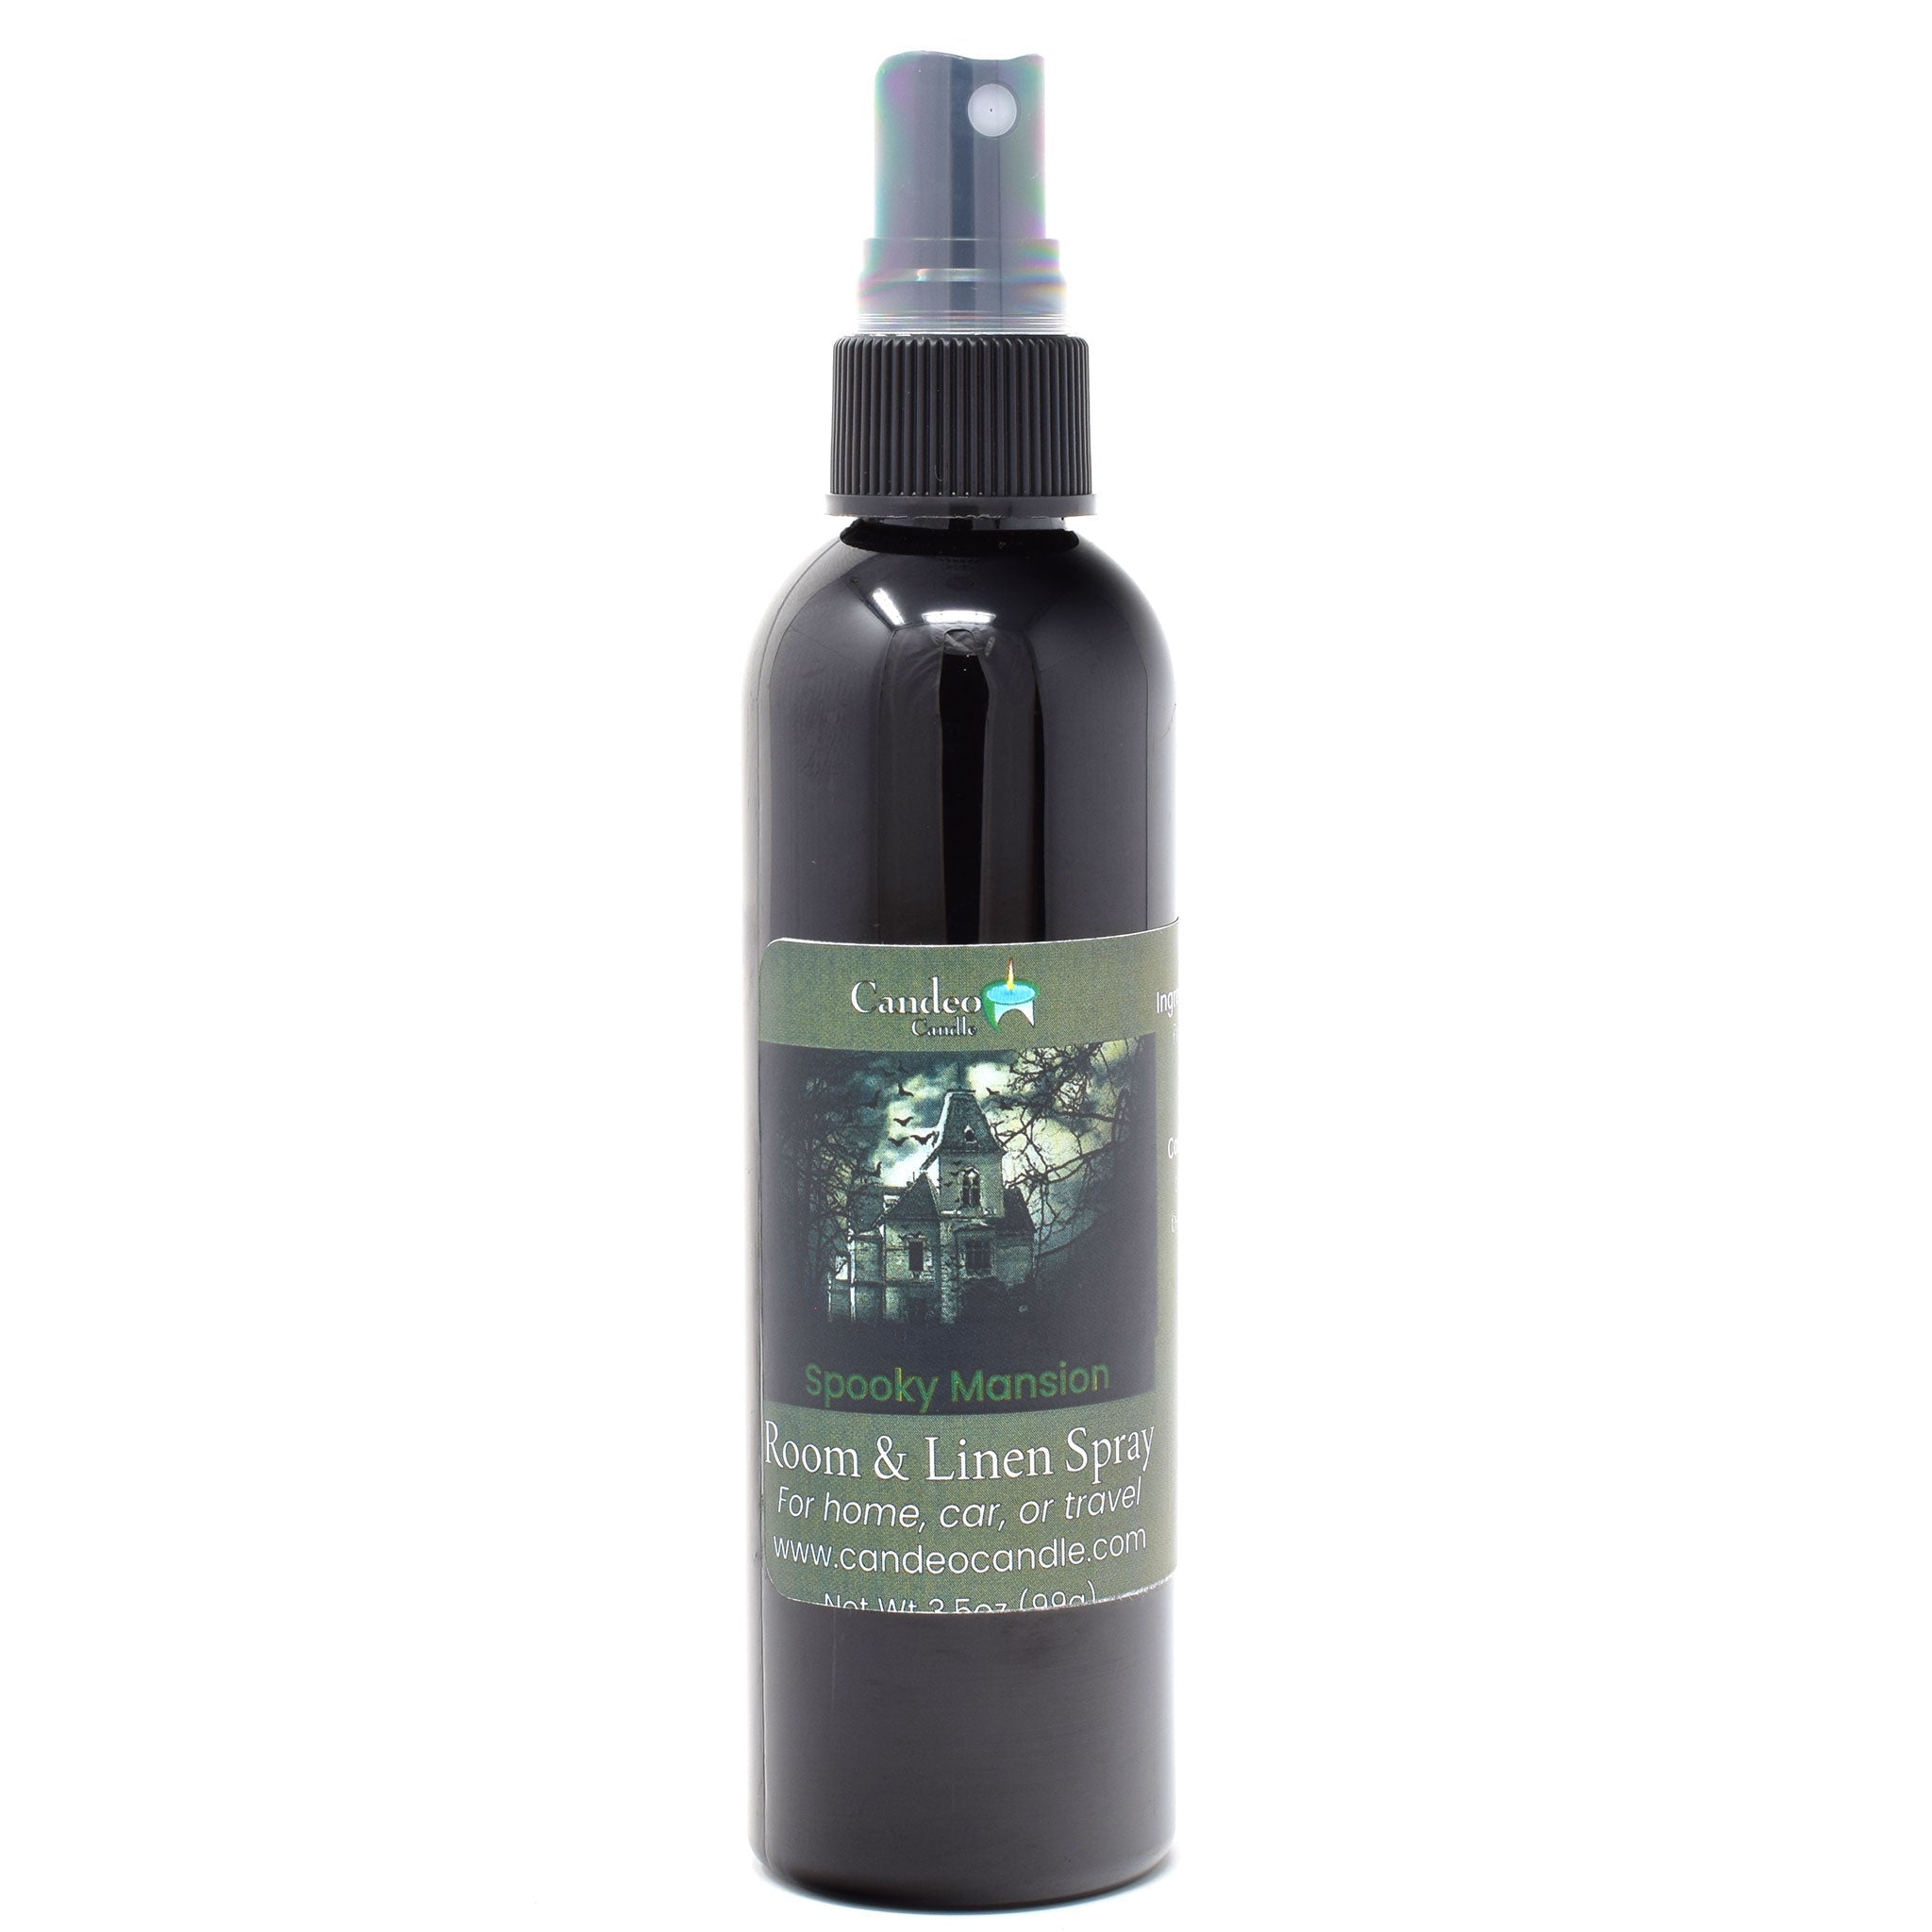 Spooky Mansion, 3.5 oz Room Spray - Candeo Candle